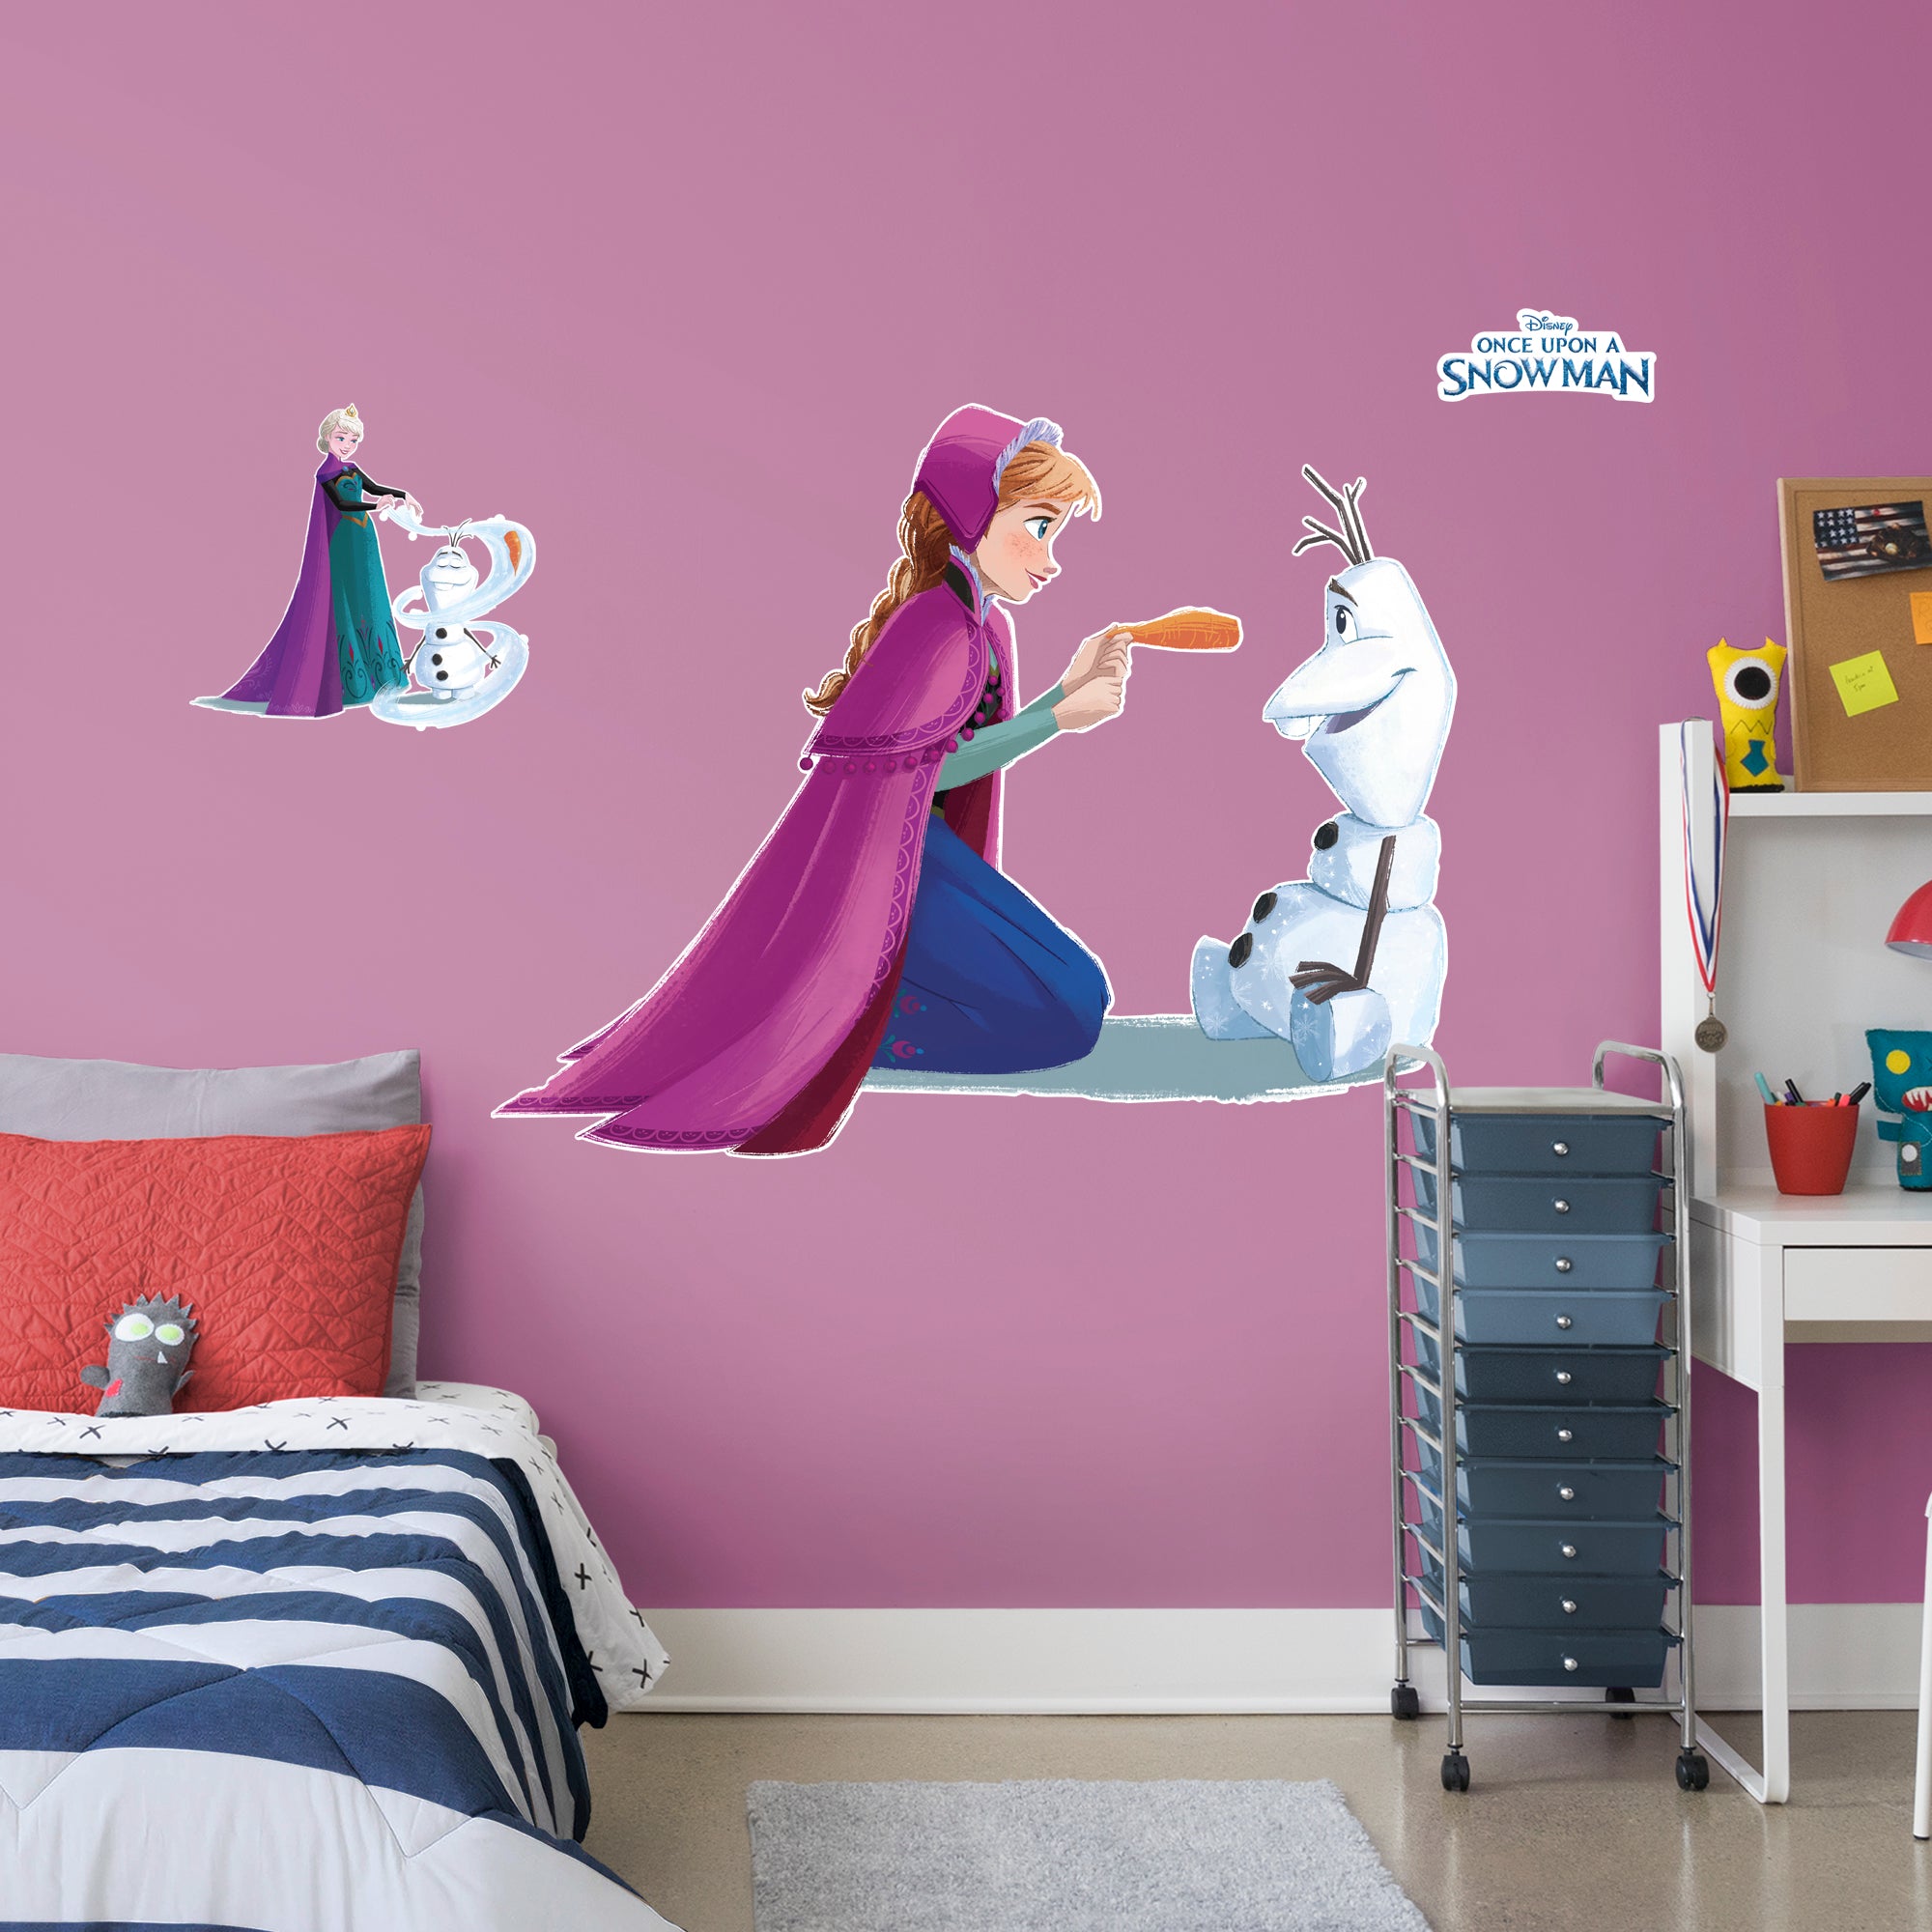 Olaf & Anna: Nose - Frozen - Once Upon A Snowman - Officially Licensed Disney Removable Wall Decal Life-Size Character + 2 Decal